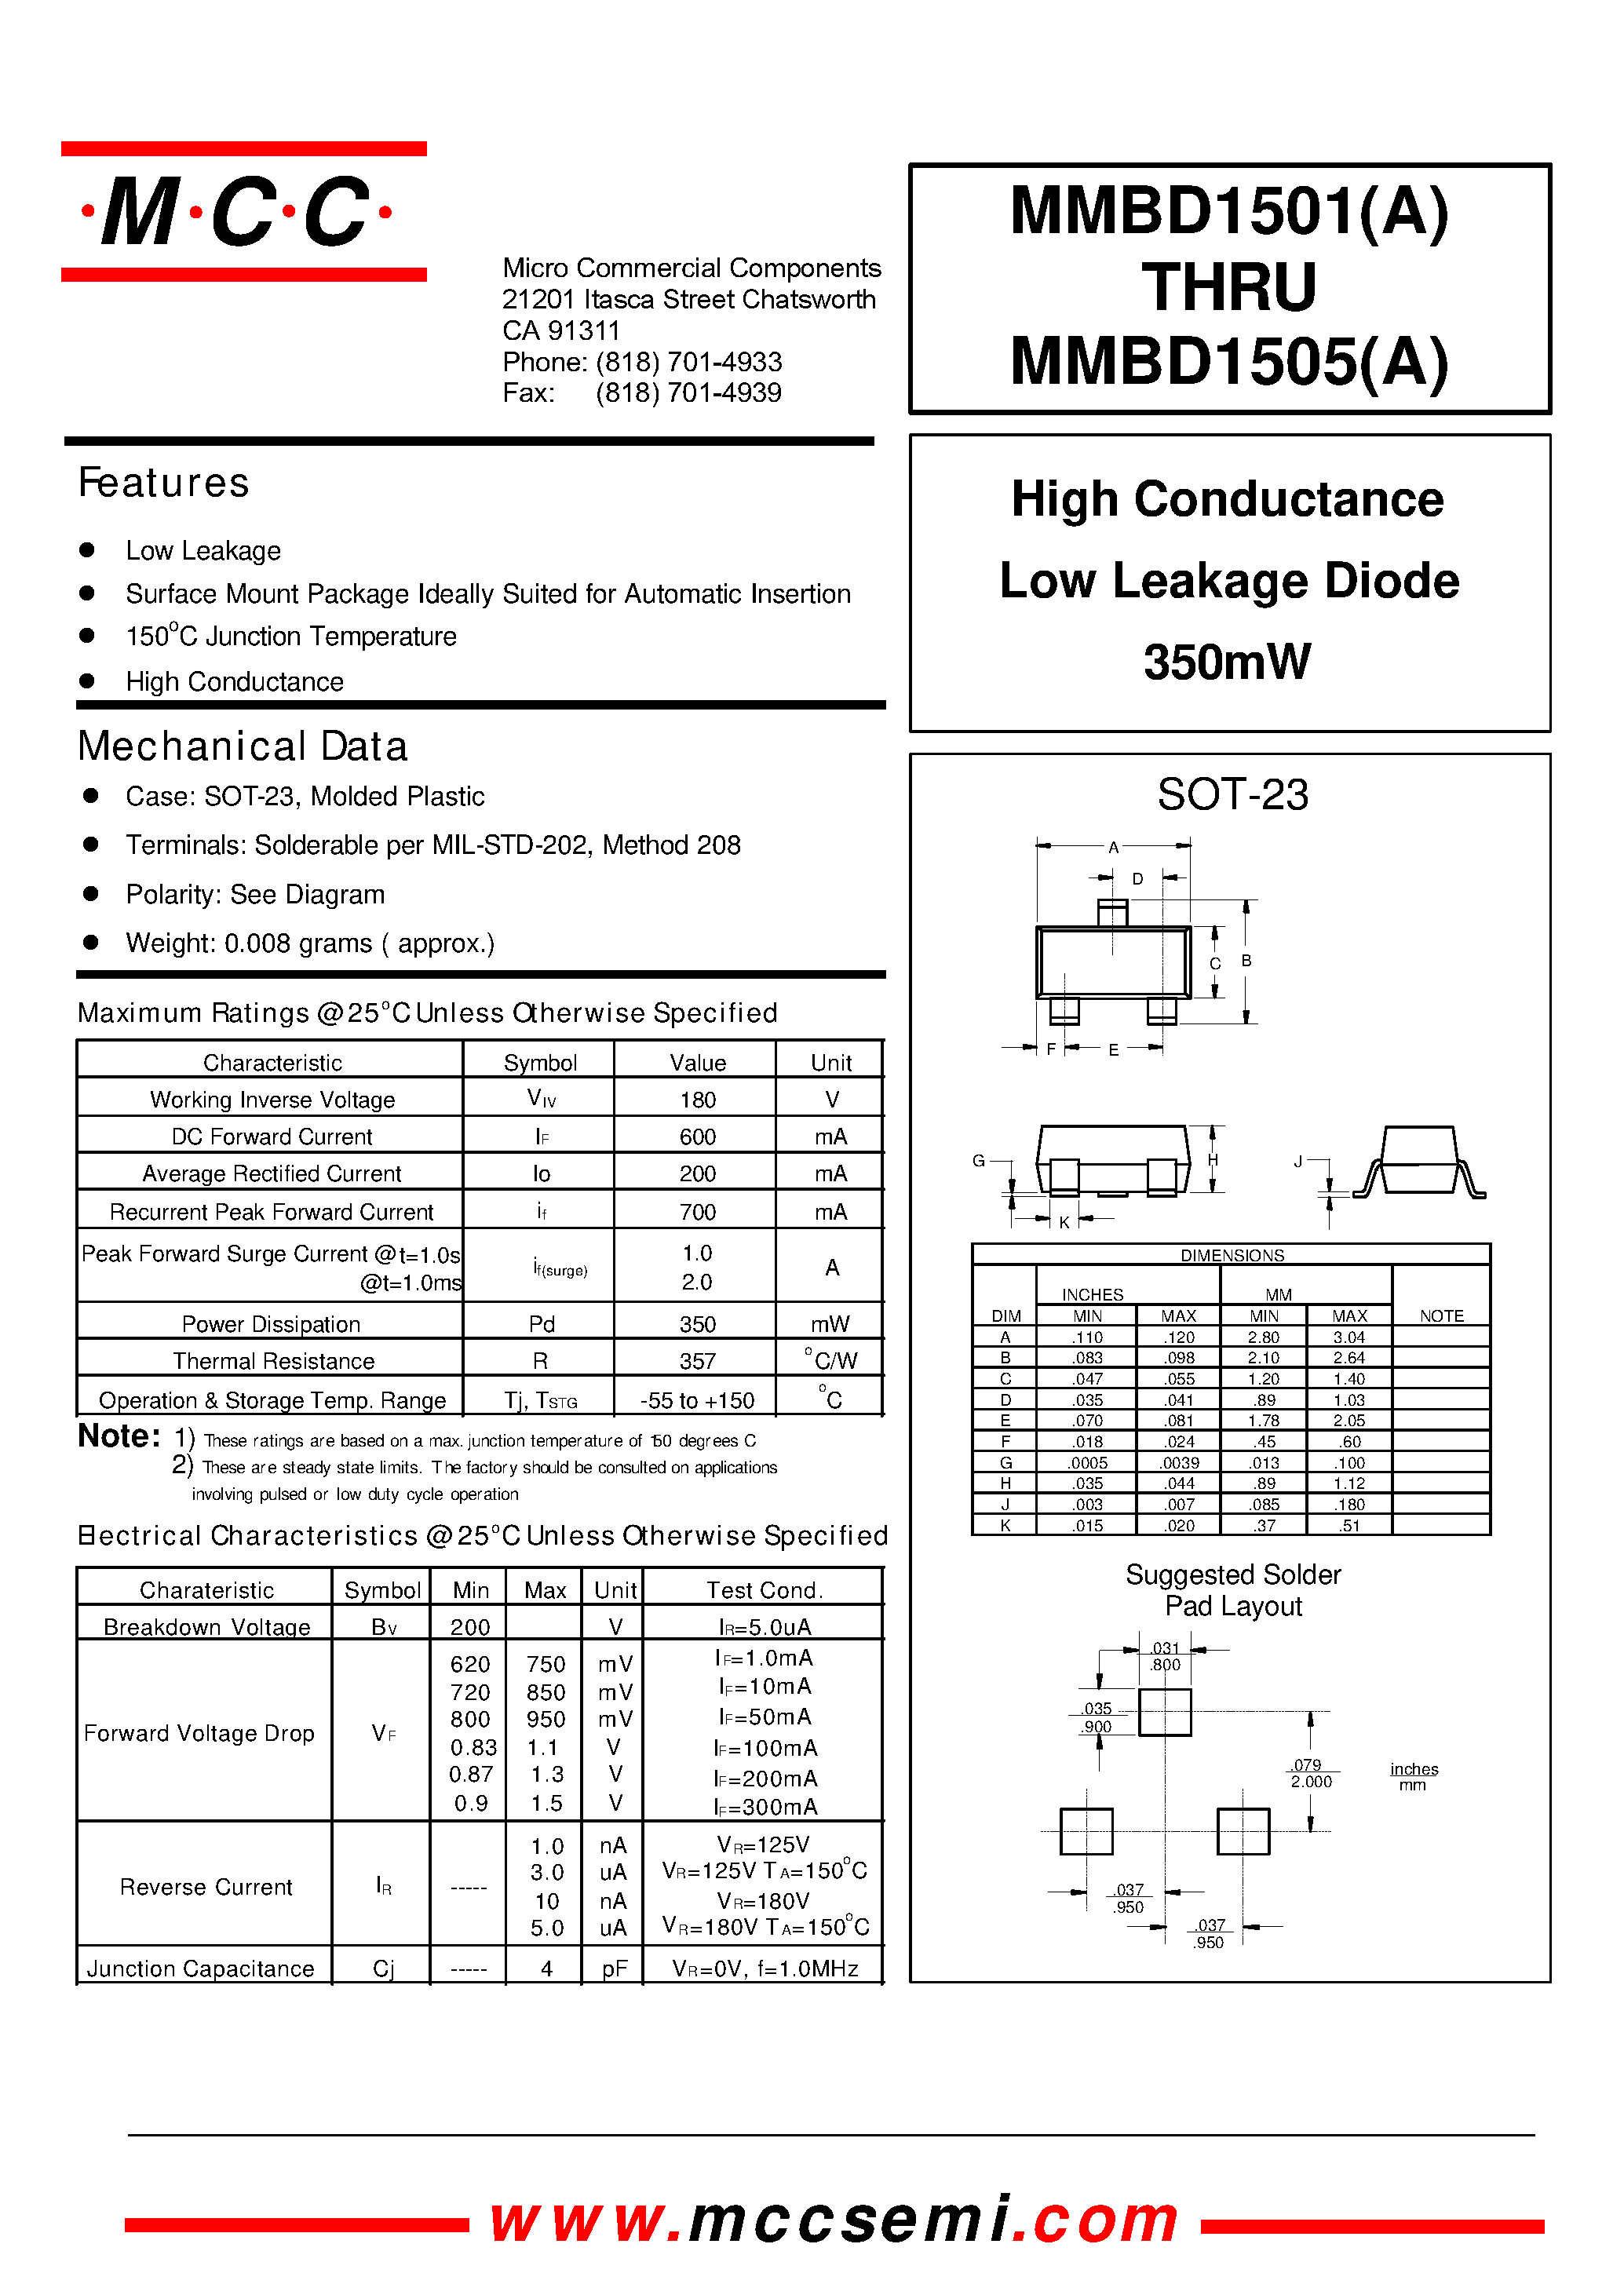 Даташит MMBD1504A - High Conductance Low Leakage Diode 350mW страница 1